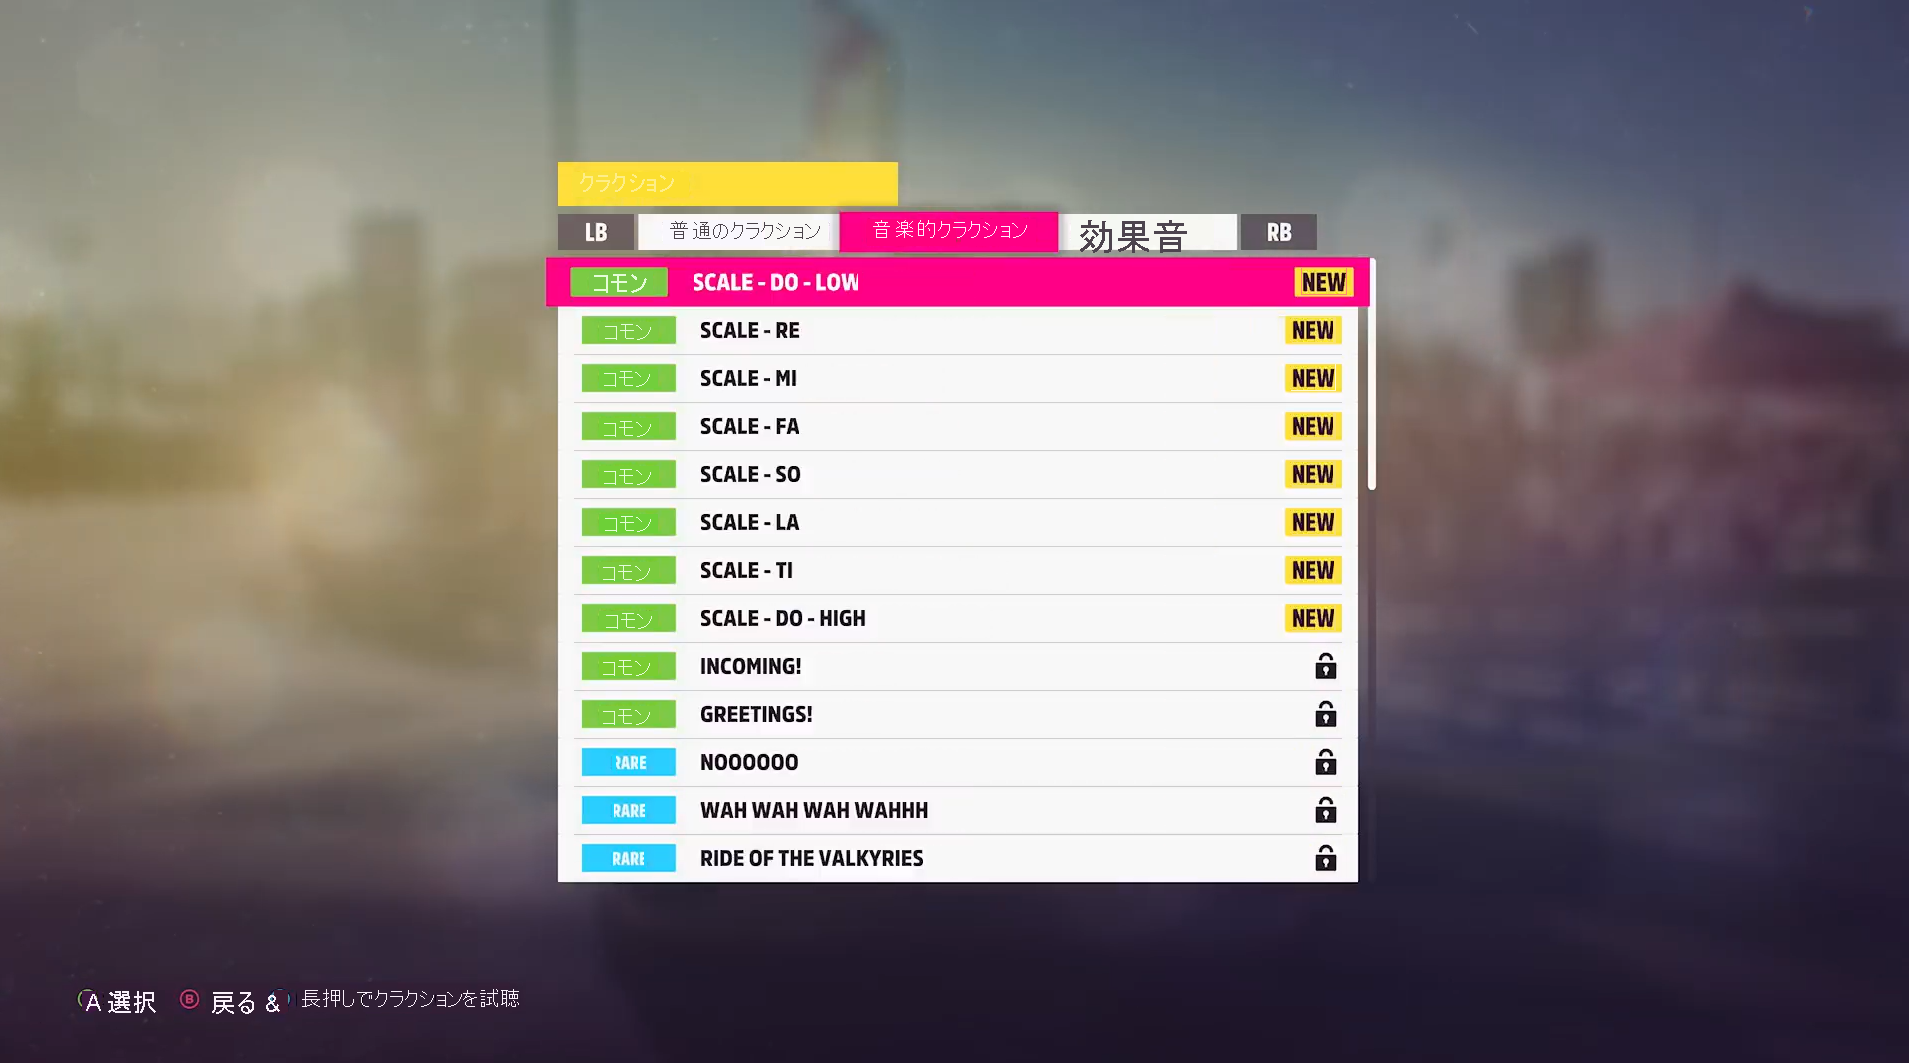 A screenshot that shows the Forza Horizon 5 Car Horns menu. The entire screen is displayed, including the Standard Horns, Musical Horns, and Sound Effects tabs.